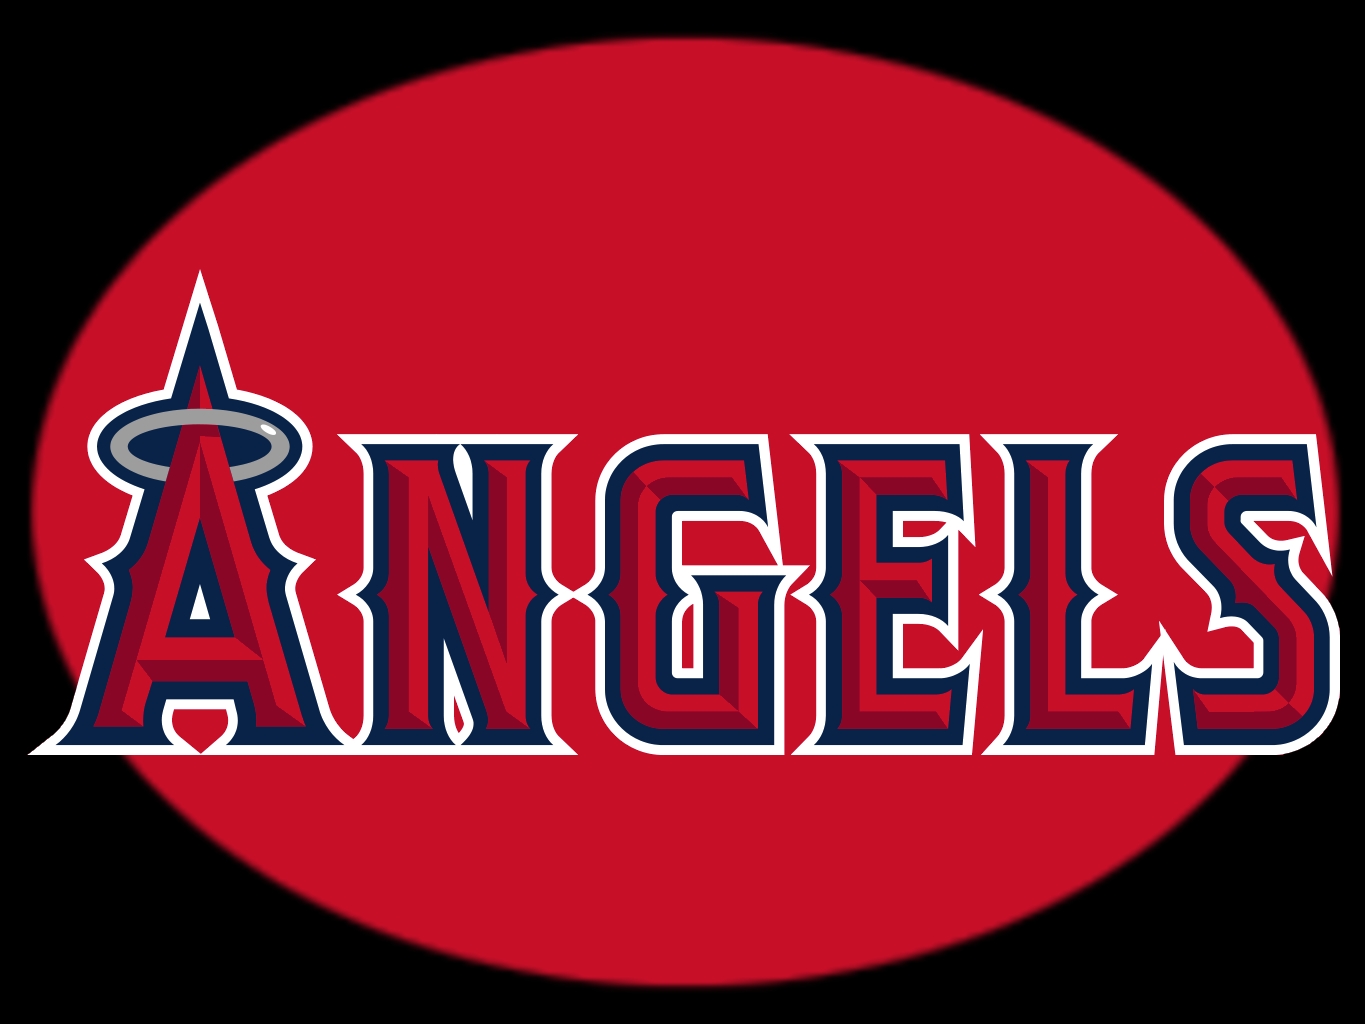  of Anaheim background Los Angeles Angels of Anaheim wallpapers